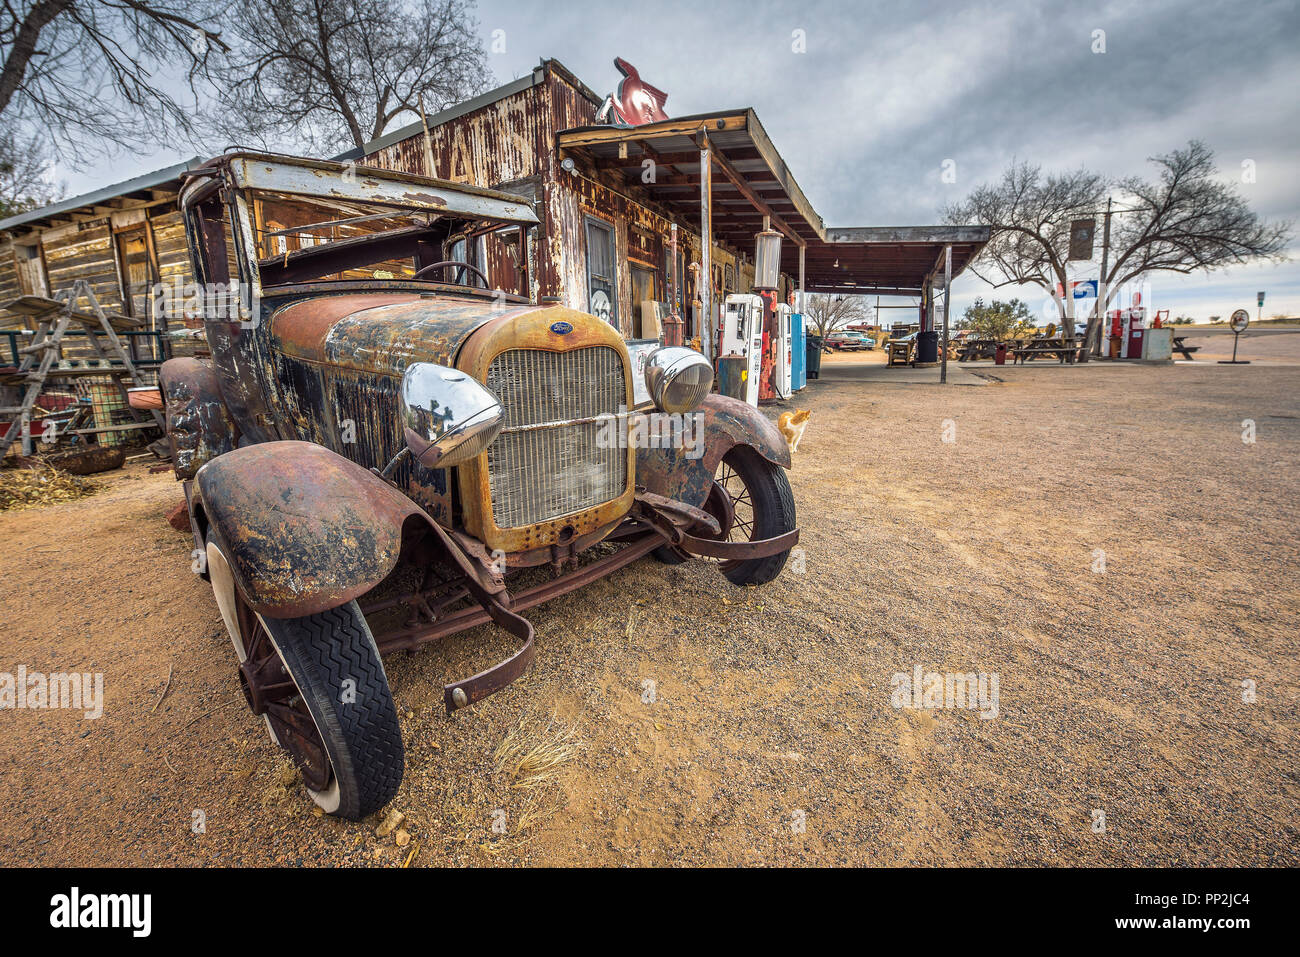 Hackberry, Arizona, USA - January 2, 2018 : Old and rusty Ford car abandoned near the Hackberry General Store. Hackberry General Store is a famous sto Stock Photo